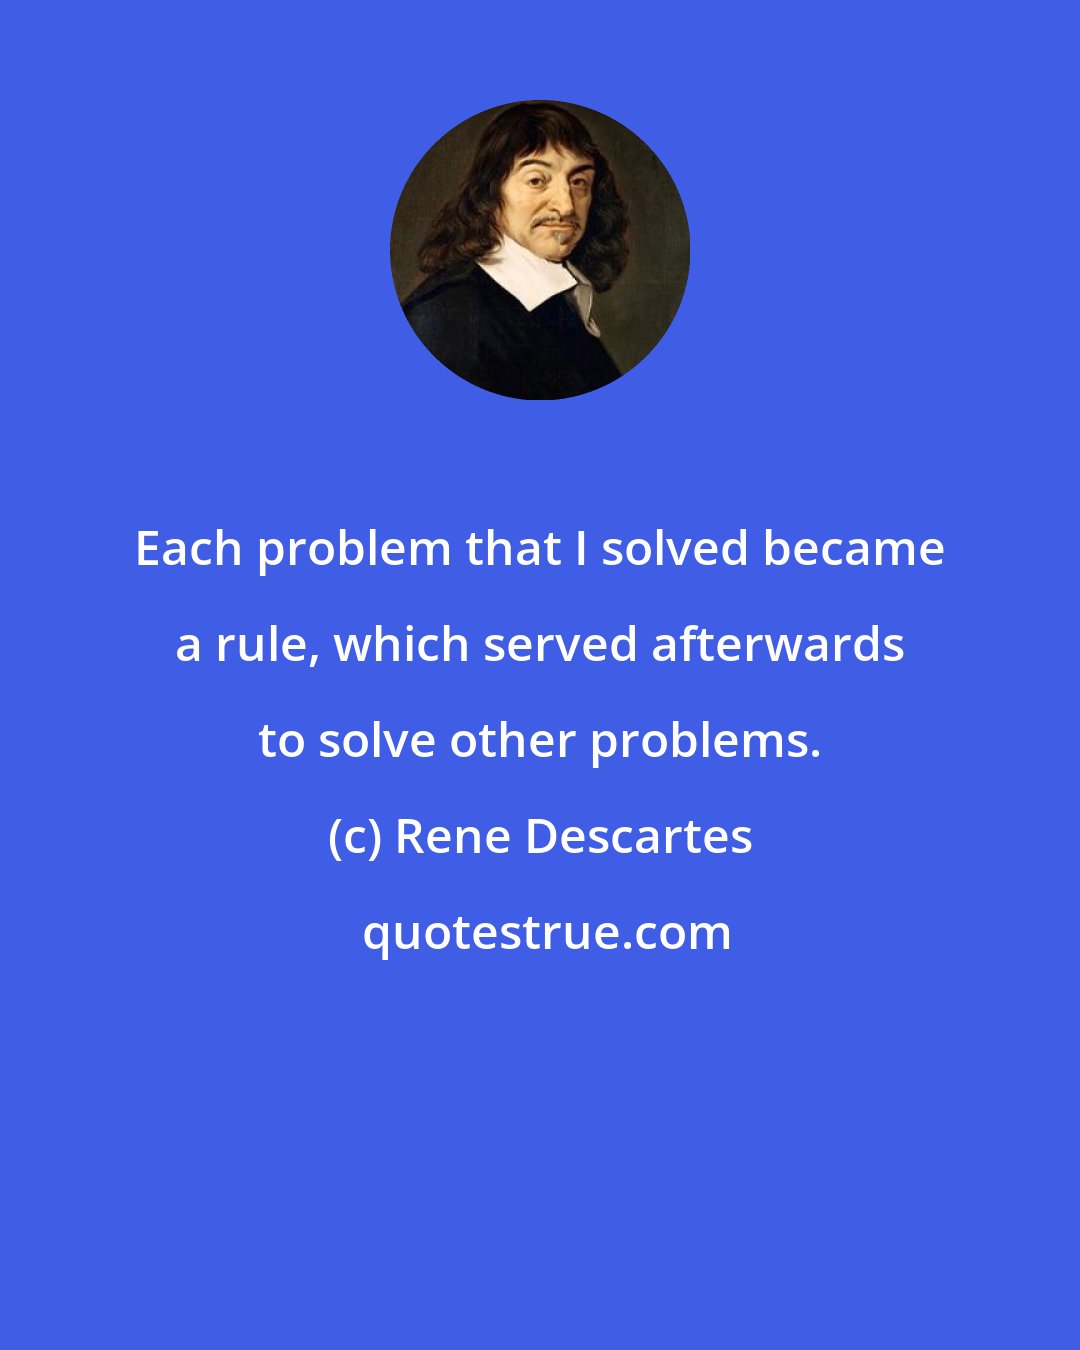 Rene Descartes: Each problem that I solved became a rule, which served afterwards to solve other problems.